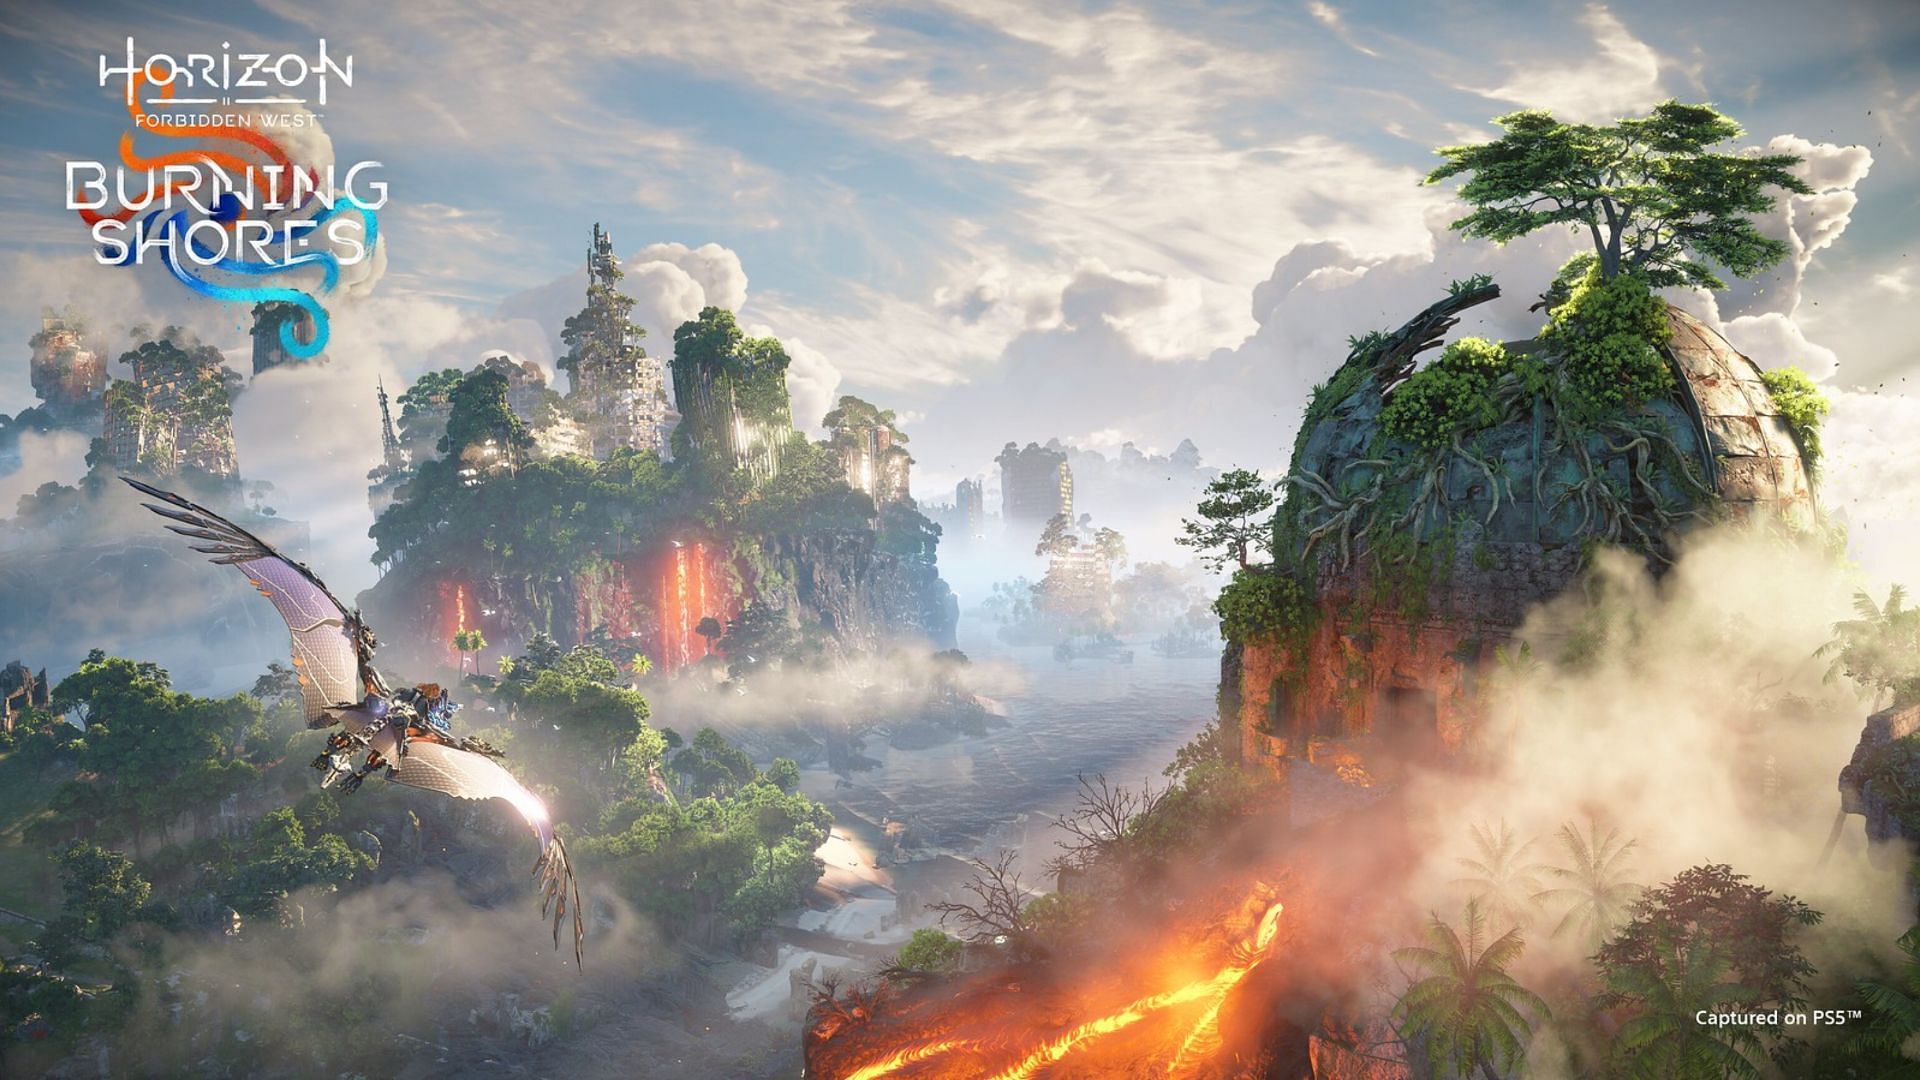 Is Horizon Forbidden West: Burning Shores available on PlayStation 4? (Image via PlayStation)